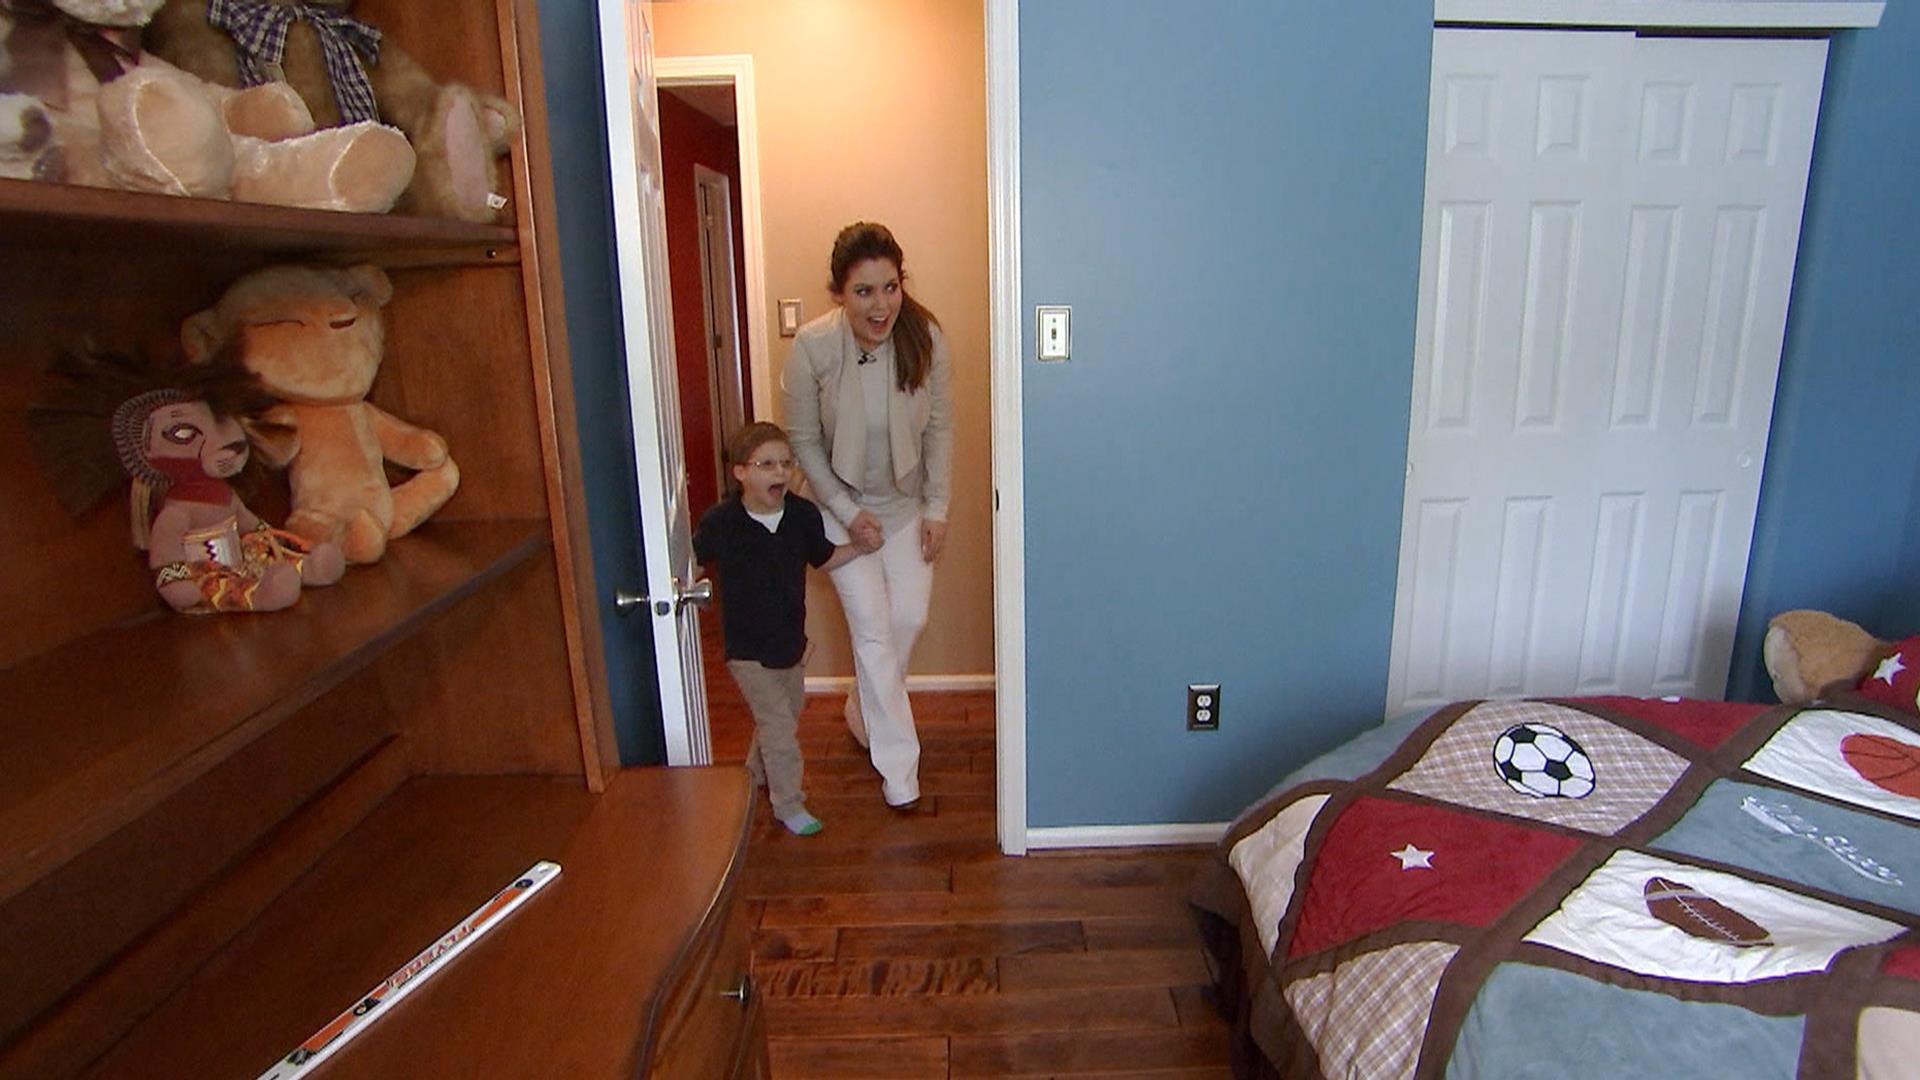 Bobbie Thomas surprises mom and son with room makeover.